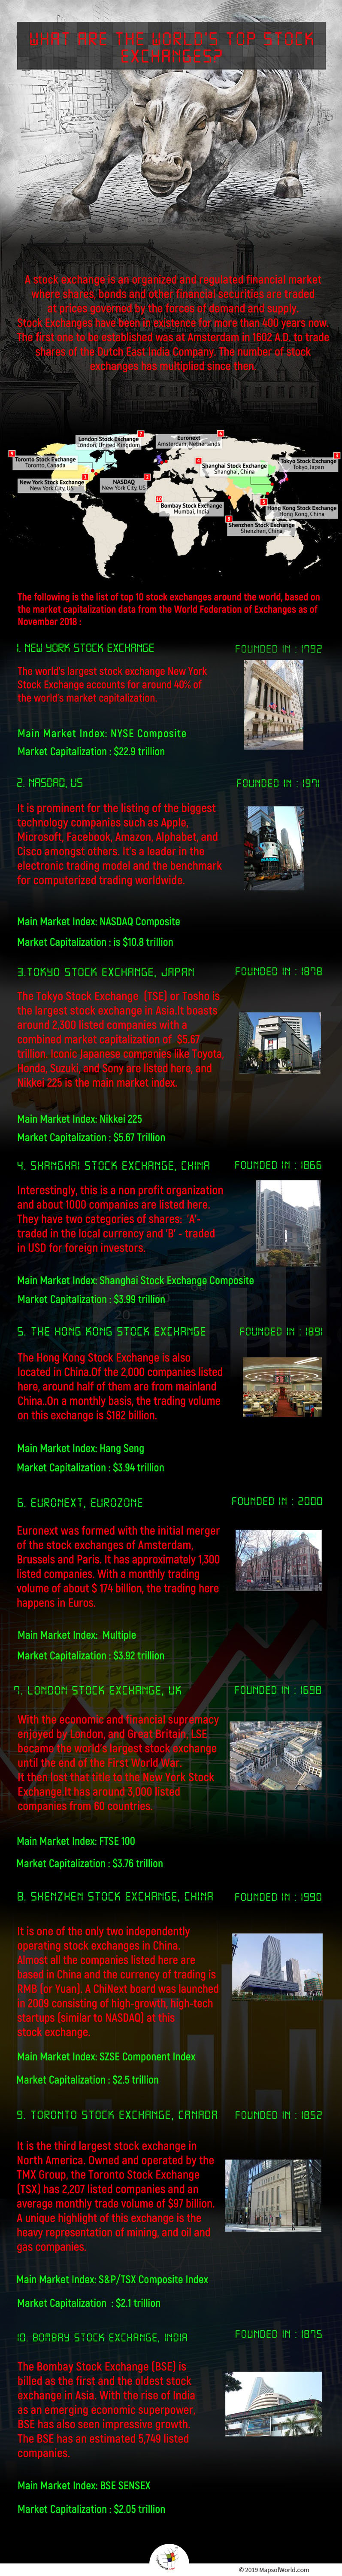 Infographic Giving Details on The World's Top Stock Exchanges